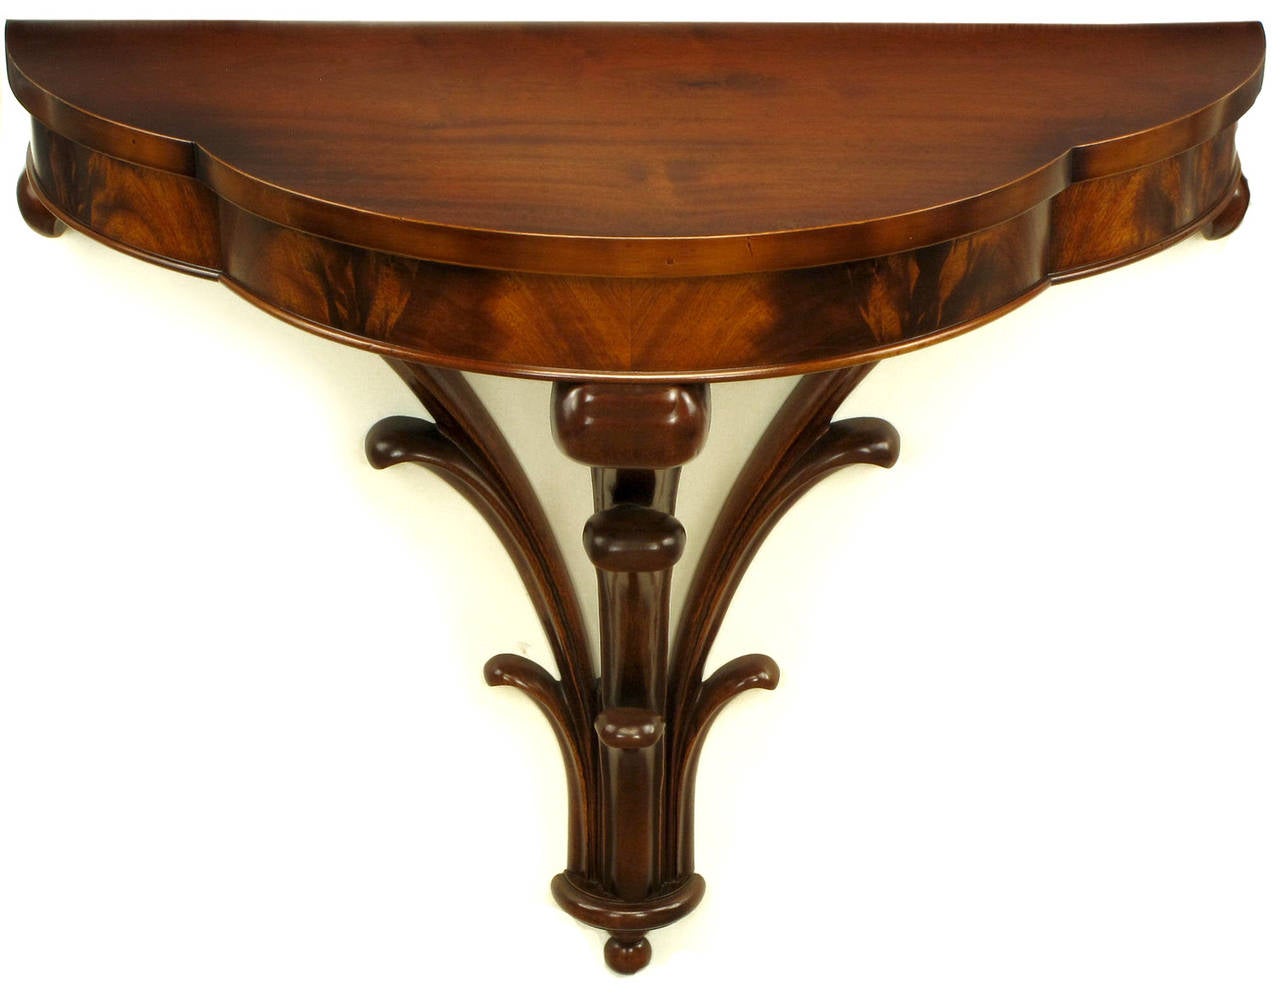 Wall-mounted demilune console table finished in exquisite crotch mahogany. Solid mahogany triple plume base in the manner of Grosfeld House. Restored to excellent condition, circa 1940.